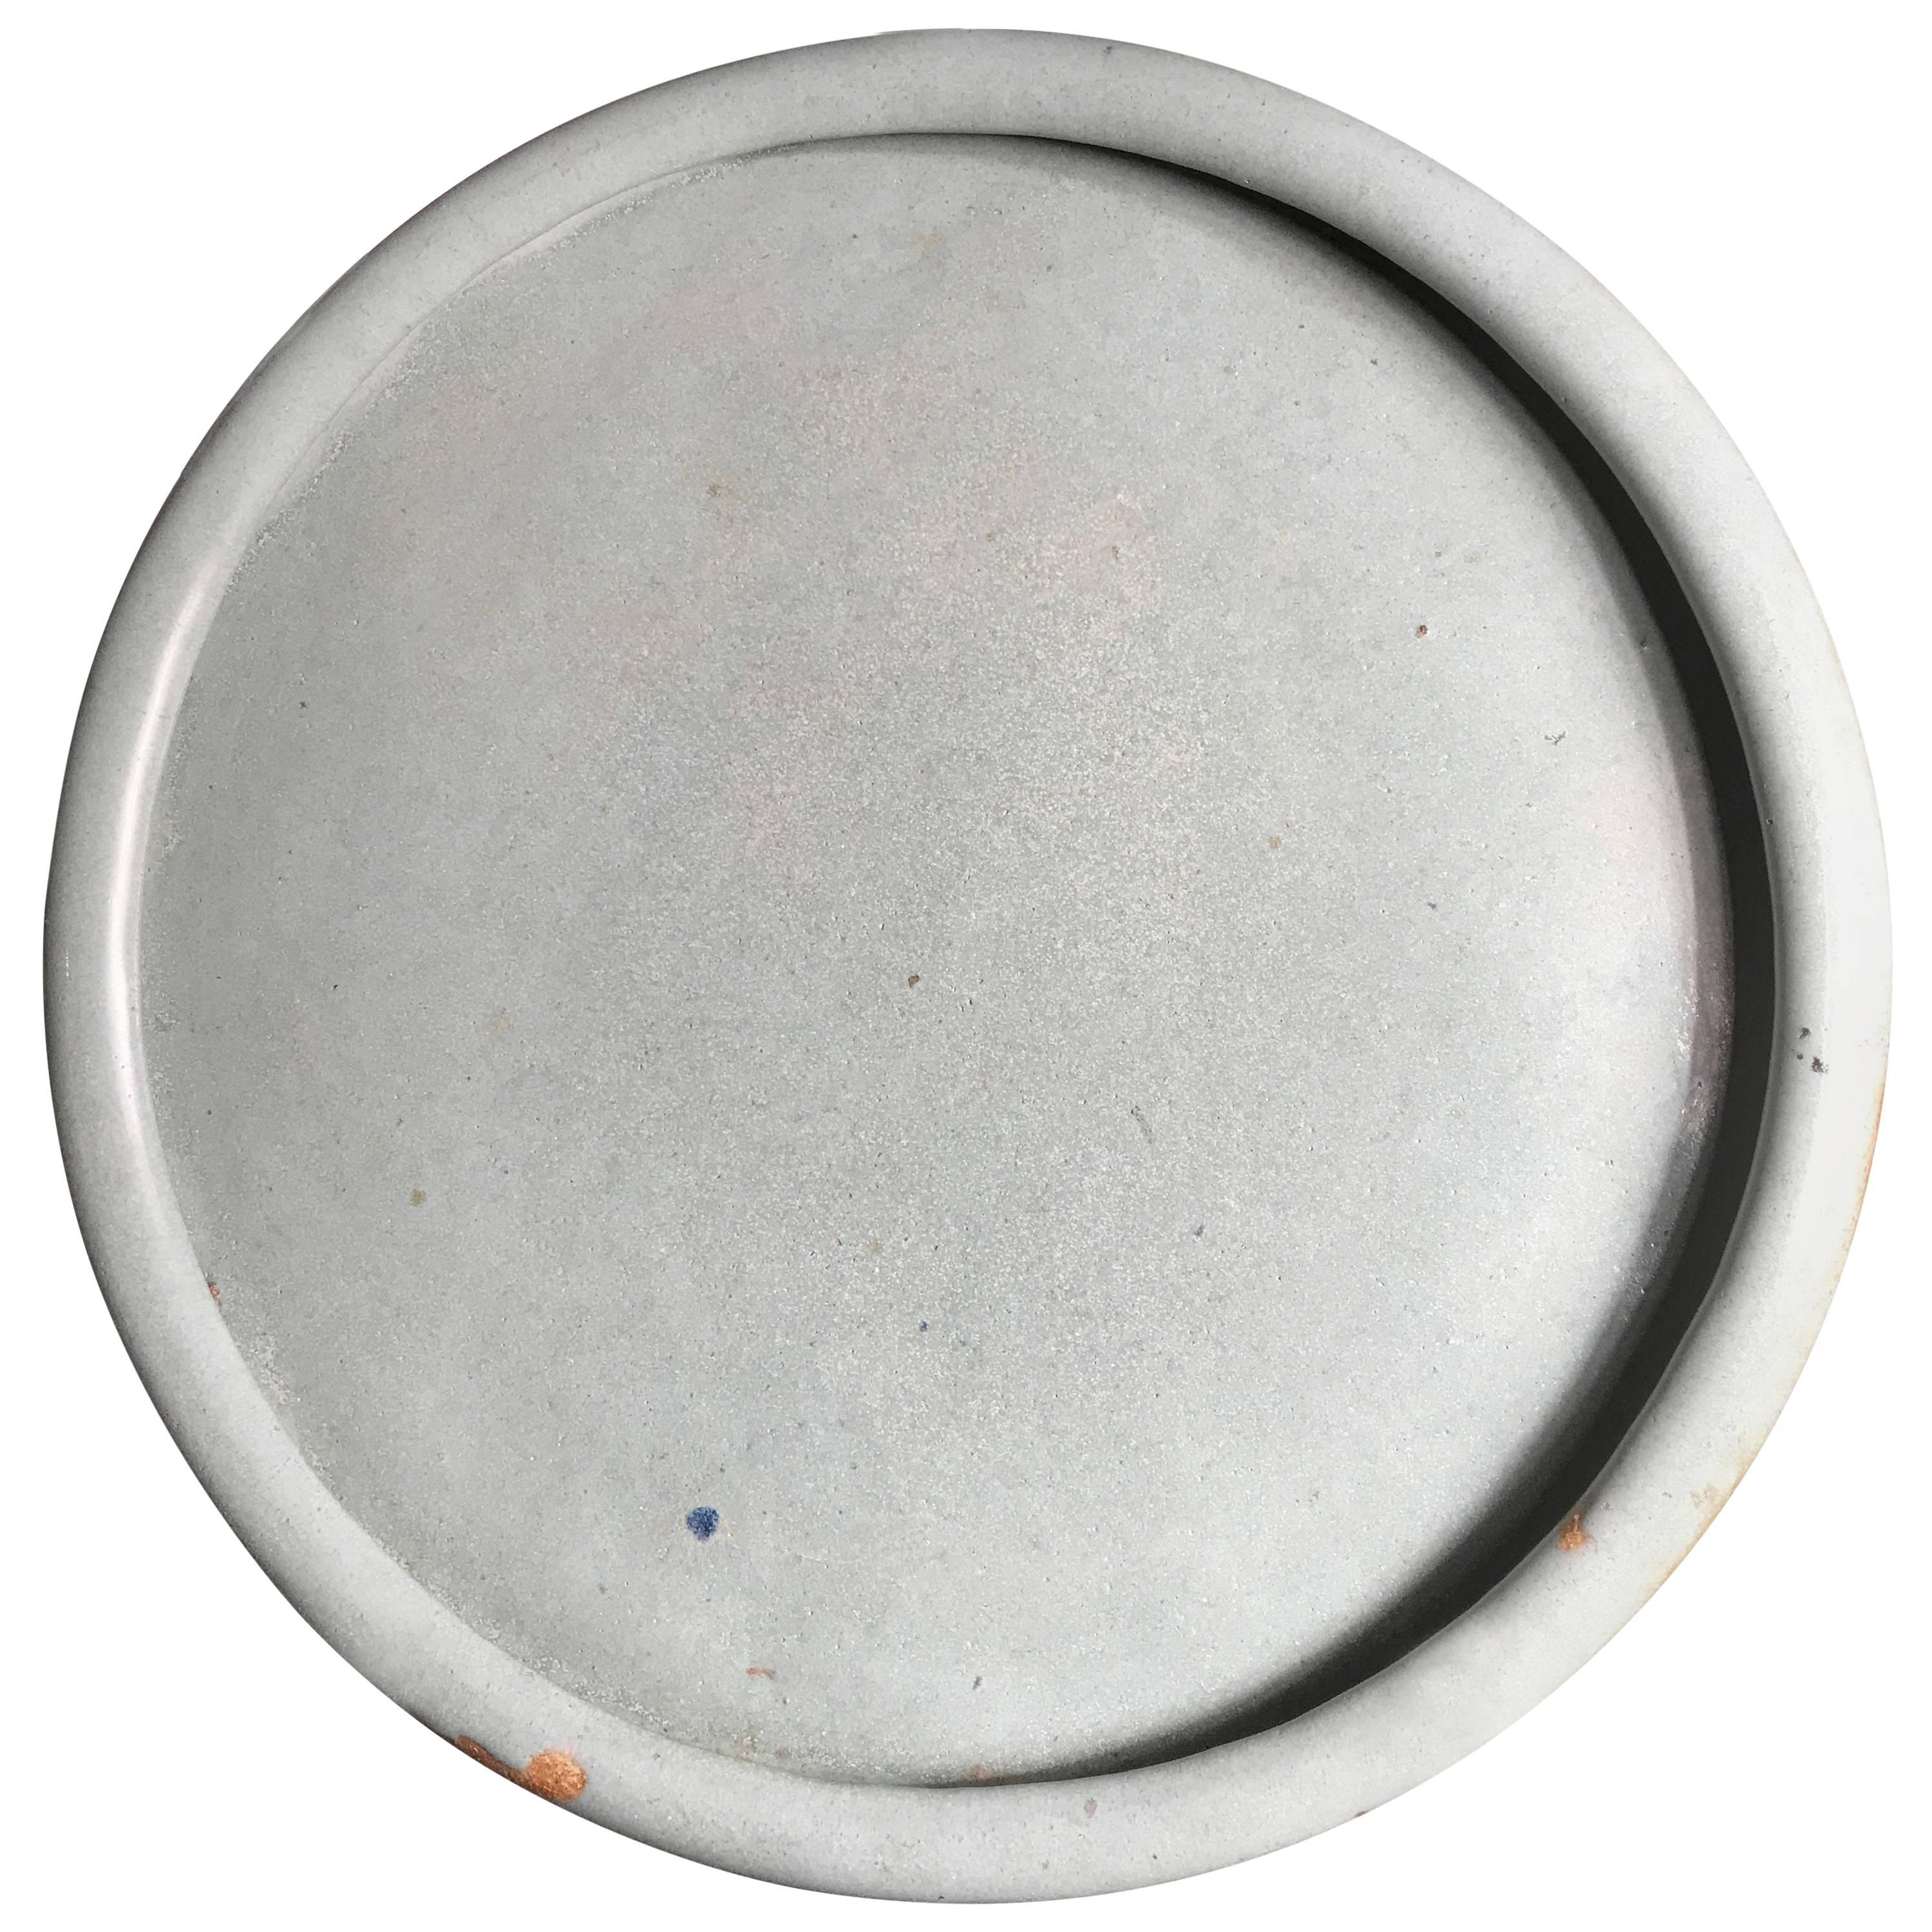 FEBRUARY SALE - NOW SAVE 25% AND MORE

A fine antique Japanese round three footed serving tray crafted in a rich blue celadon drip glazing dating to the Taisho period (1912-1926).

Condition: This thick, heavy well-crafted tray is well preserved